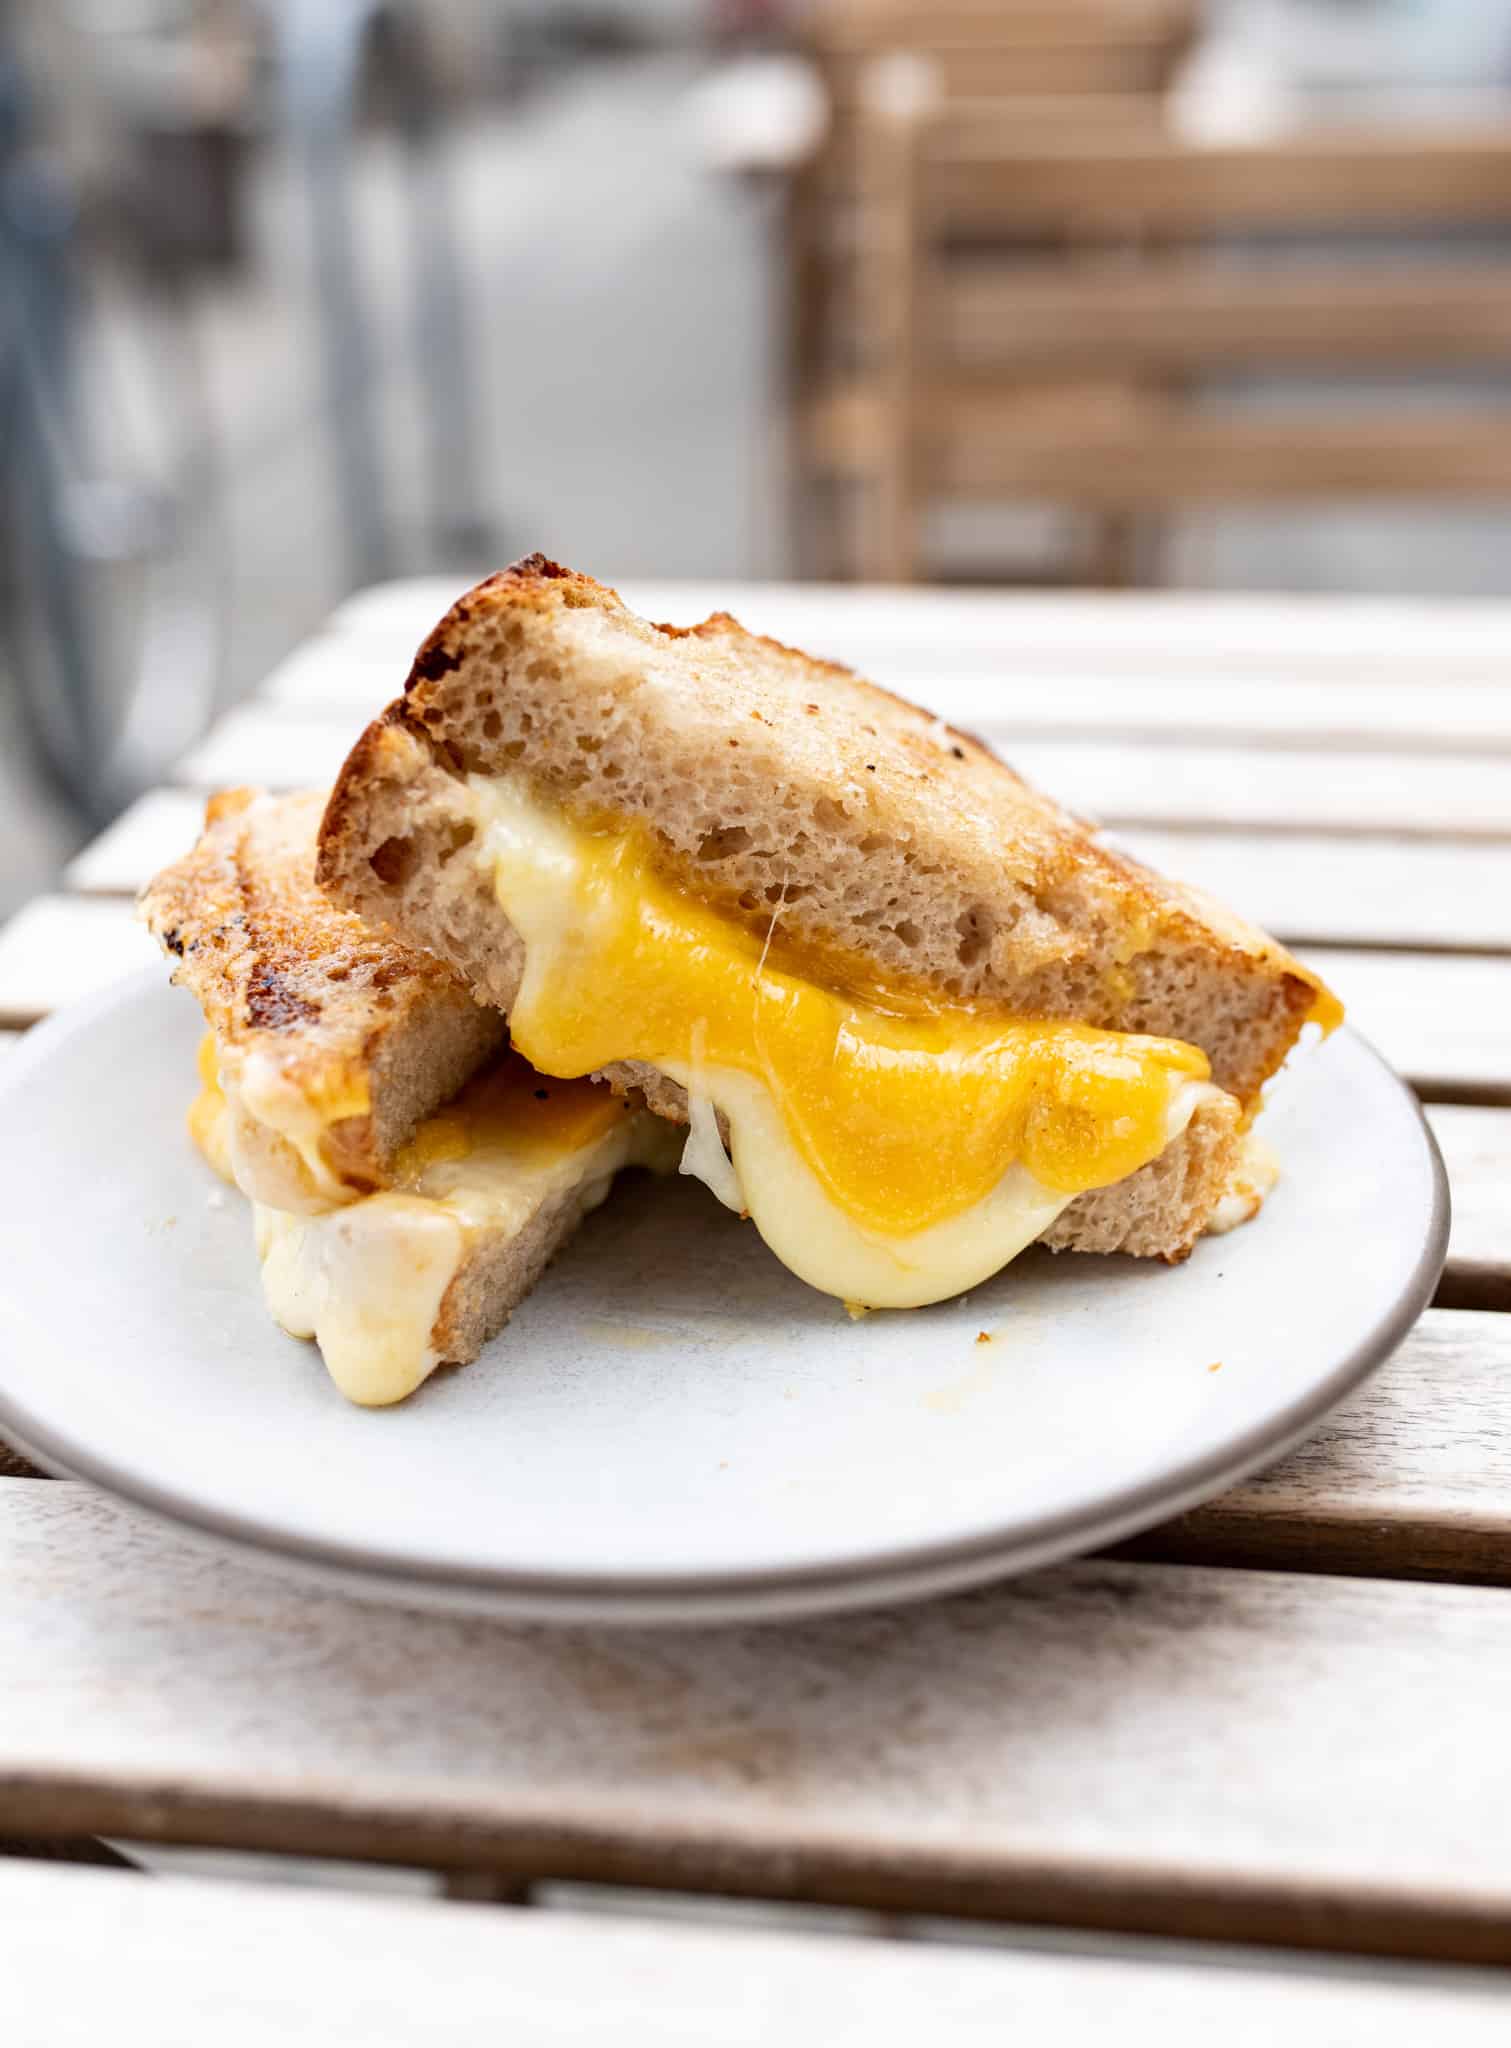 Grilled cheese sandwich by Outerlands, best sandwiches in san francisco